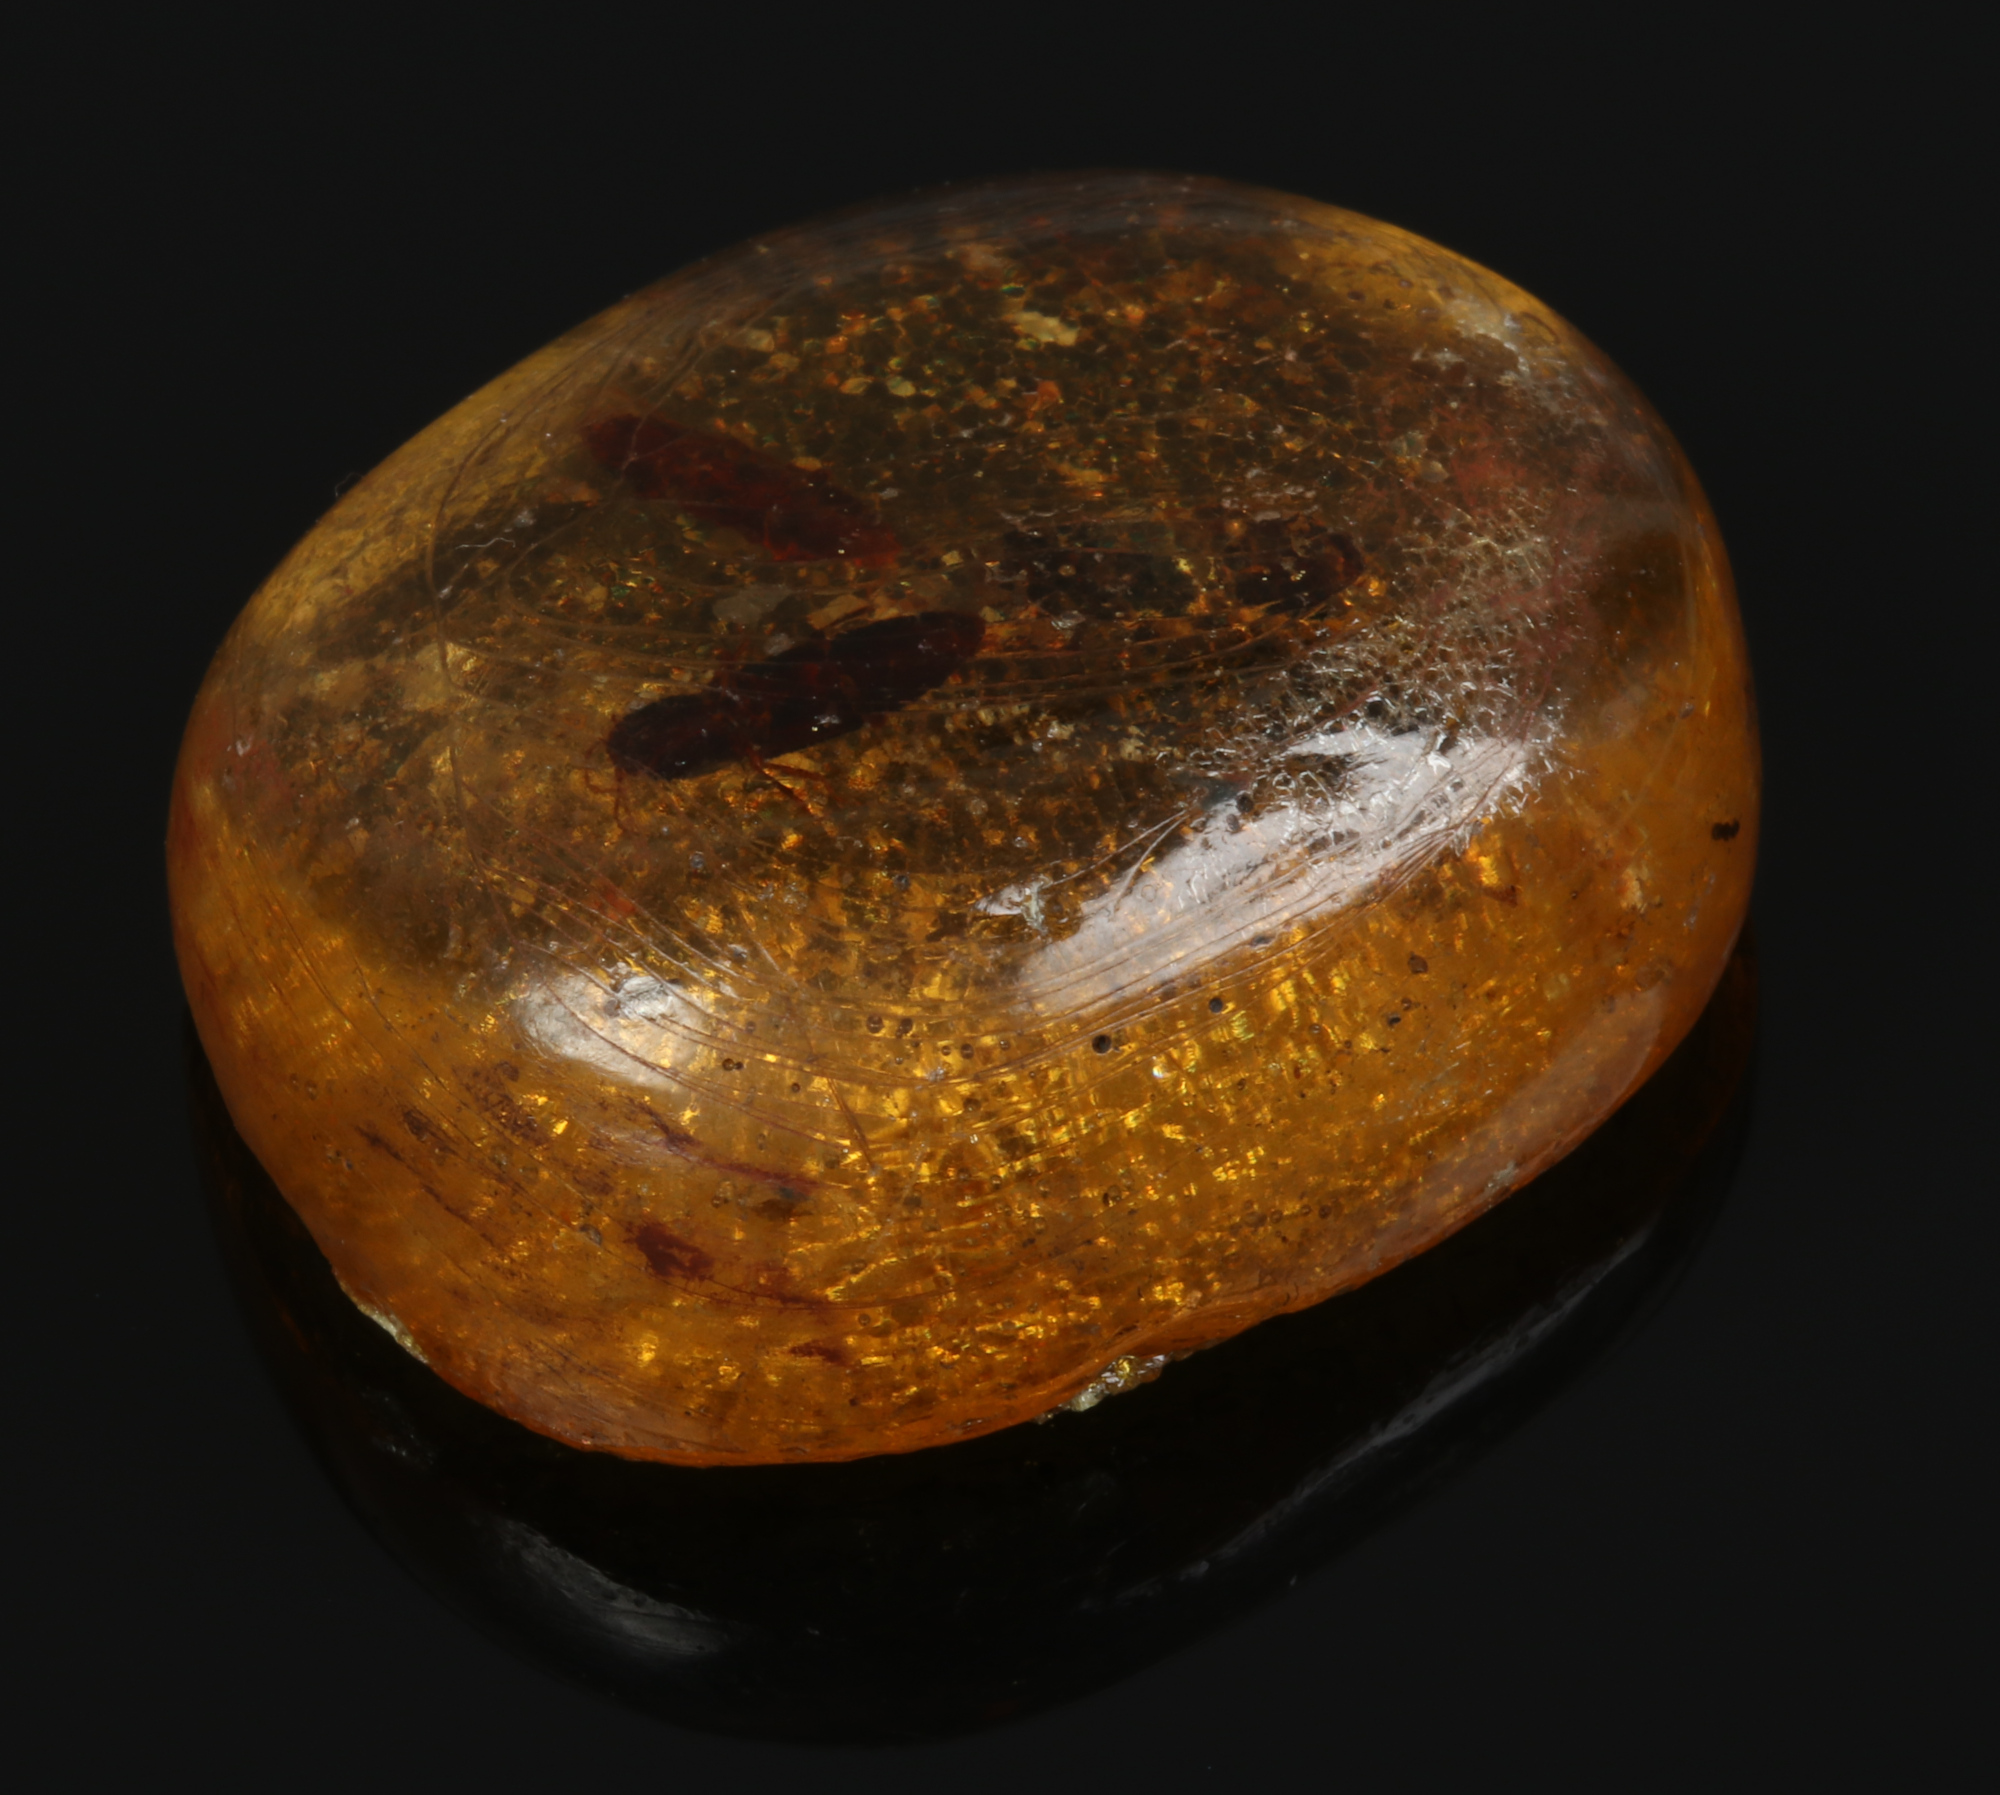 A piece of amber with insect inclusions.